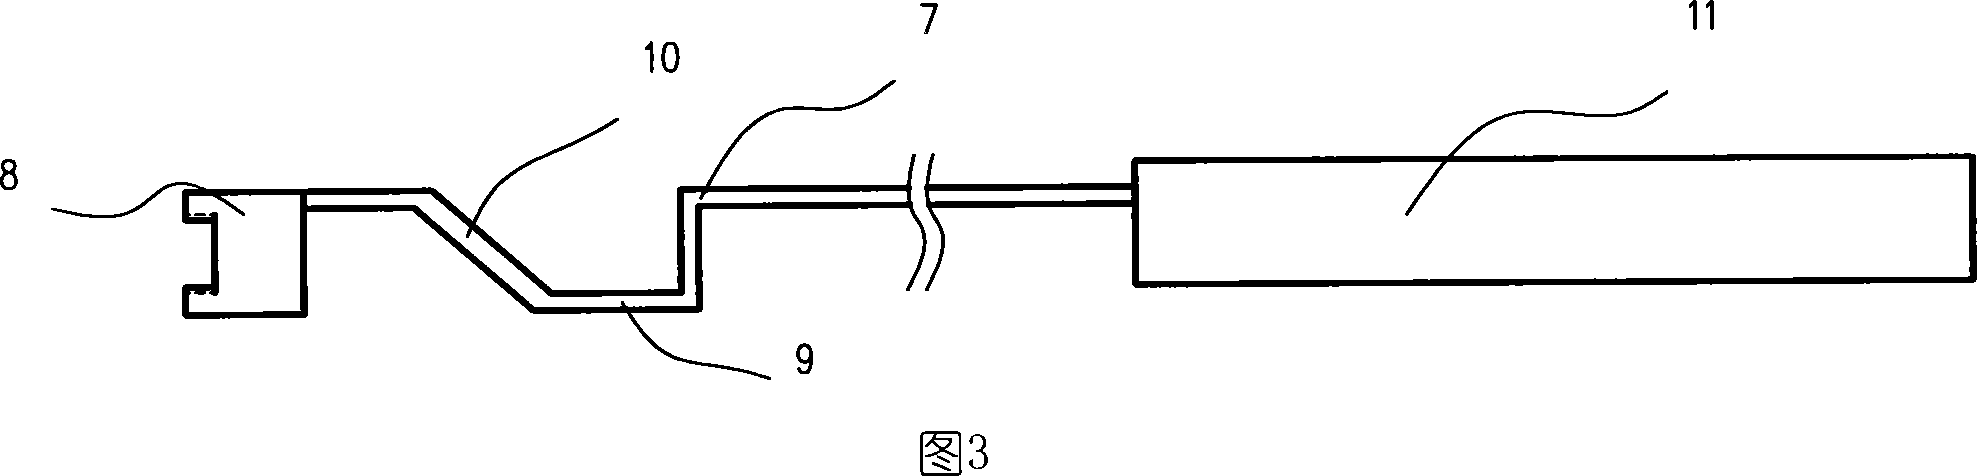 One-way bolt fastener and its assembling method